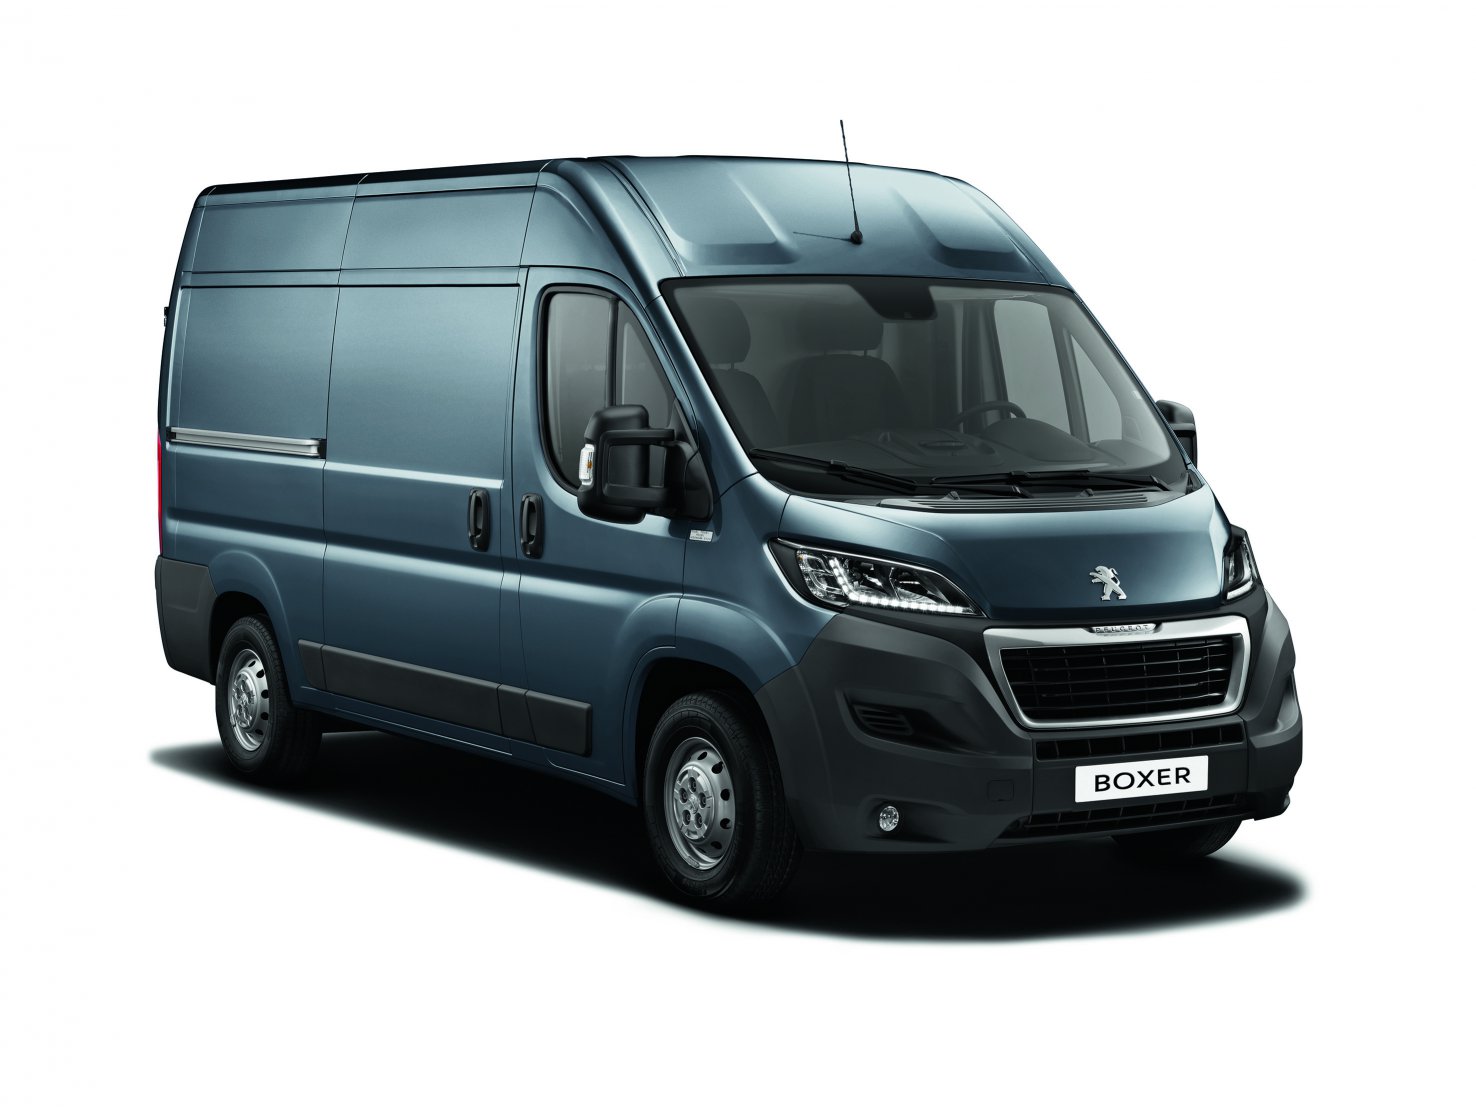 Peugeot Rolls Out Its BlueHDi Technology To The Boxer